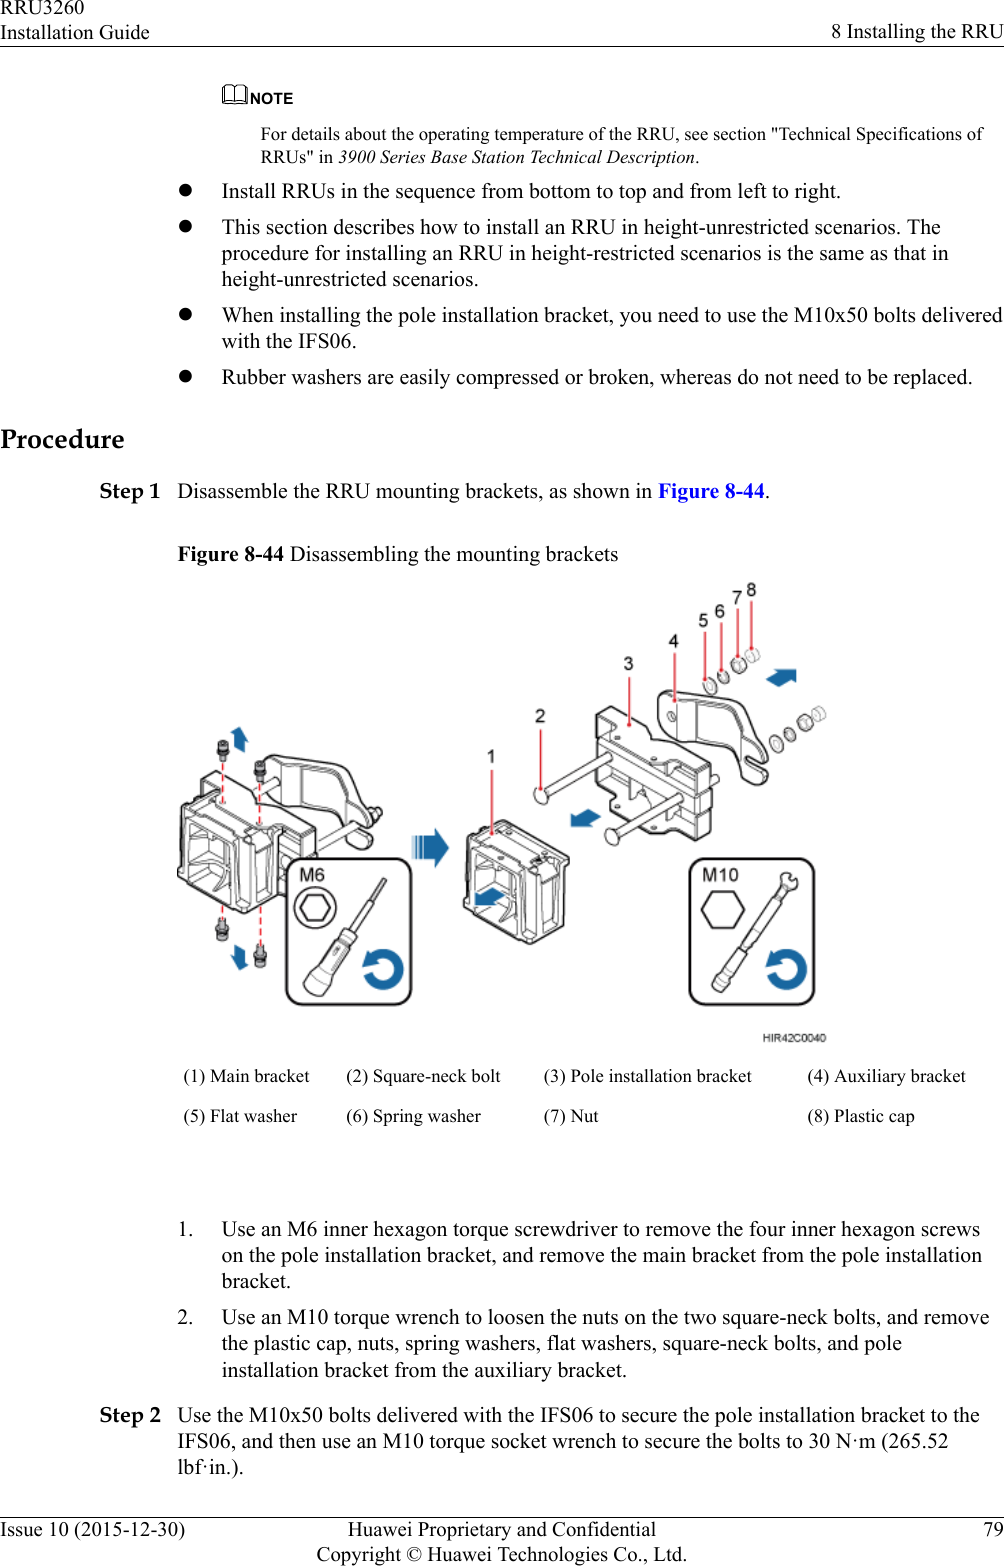 NOTEFor details about the operating temperature of the RRU, see section &quot;Technical Specifications ofRRUs&quot; in 3900 Series Base Station Technical Description.lInstall RRUs in the sequence from bottom to top and from left to right.lThis section describes how to install an RRU in height-unrestricted scenarios. Theprocedure for installing an RRU in height-restricted scenarios is the same as that inheight-unrestricted scenarios.lWhen installing the pole installation bracket, you need to use the M10x50 bolts deliveredwith the IFS06.lRubber washers are easily compressed or broken, whereas do not need to be replaced.ProcedureStep 1 Disassemble the RRU mounting brackets, as shown in Figure 8-44.Figure 8-44 Disassembling the mounting brackets(1) Main bracket (2) Square-neck bolt (3) Pole installation bracket (4) Auxiliary bracket(5) Flat washer (6) Spring washer (7) Nut (8) Plastic cap 1. Use an M6 inner hexagon torque screwdriver to remove the four inner hexagon screwson the pole installation bracket, and remove the main bracket from the pole installationbracket.2. Use an M10 torque wrench to loosen the nuts on the two square-neck bolts, and removethe plastic cap, nuts, spring washers, flat washers, square-neck bolts, and poleinstallation bracket from the auxiliary bracket.Step 2 Use the M10x50 bolts delivered with the IFS06 to secure the pole installation bracket to theIFS06, and then use an M10 torque socket wrench to secure the bolts to 30 N·m (265.52lbf·in.).RRU3260Installation Guide 8 Installing the RRUIssue 10 (2015-12-30) Huawei Proprietary and ConfidentialCopyright © Huawei Technologies Co., Ltd.79